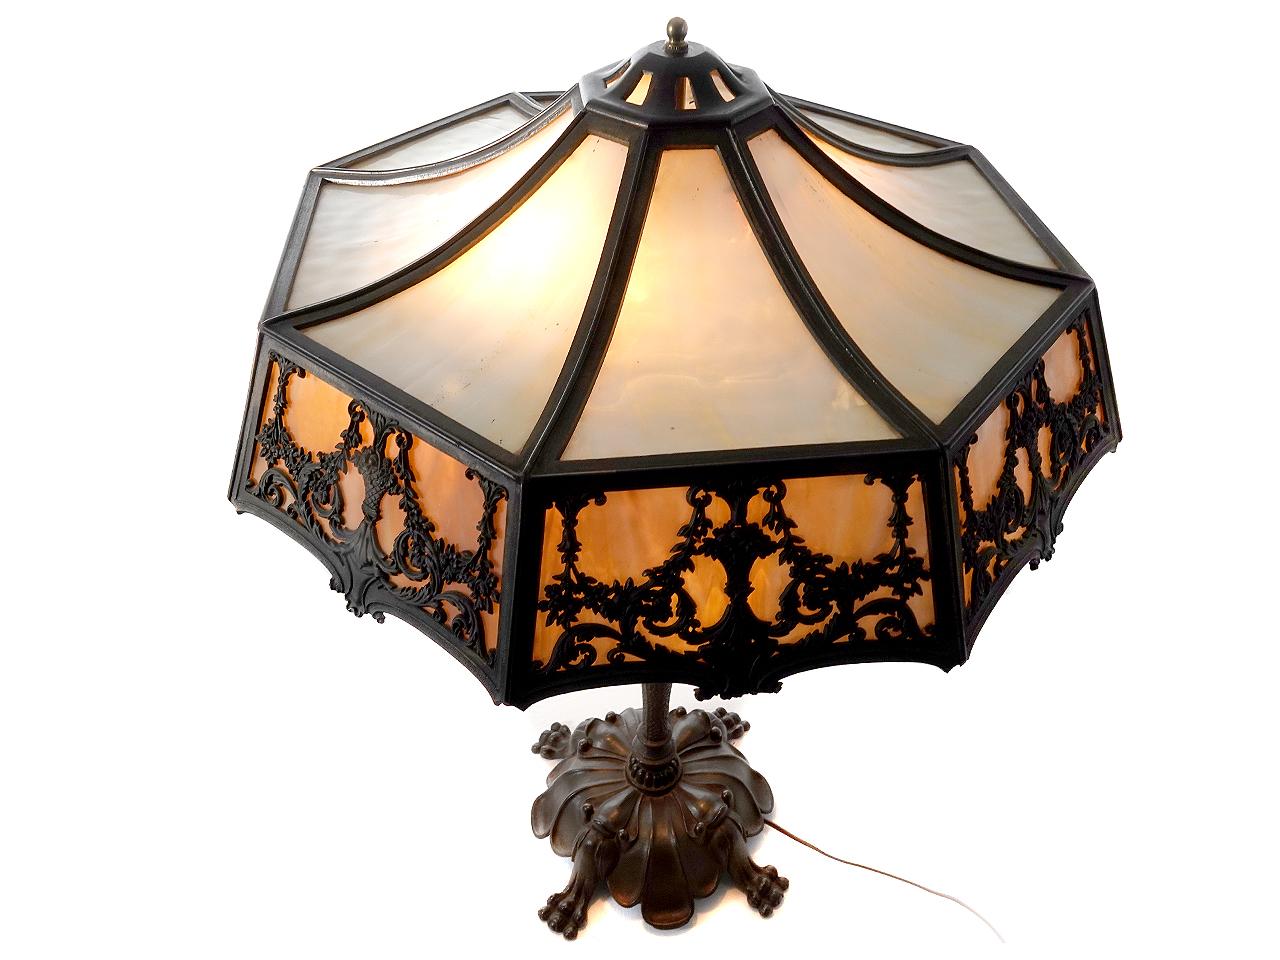 20th Century Tall Art Nouveau Table Lamp with Floral Filigree Panels